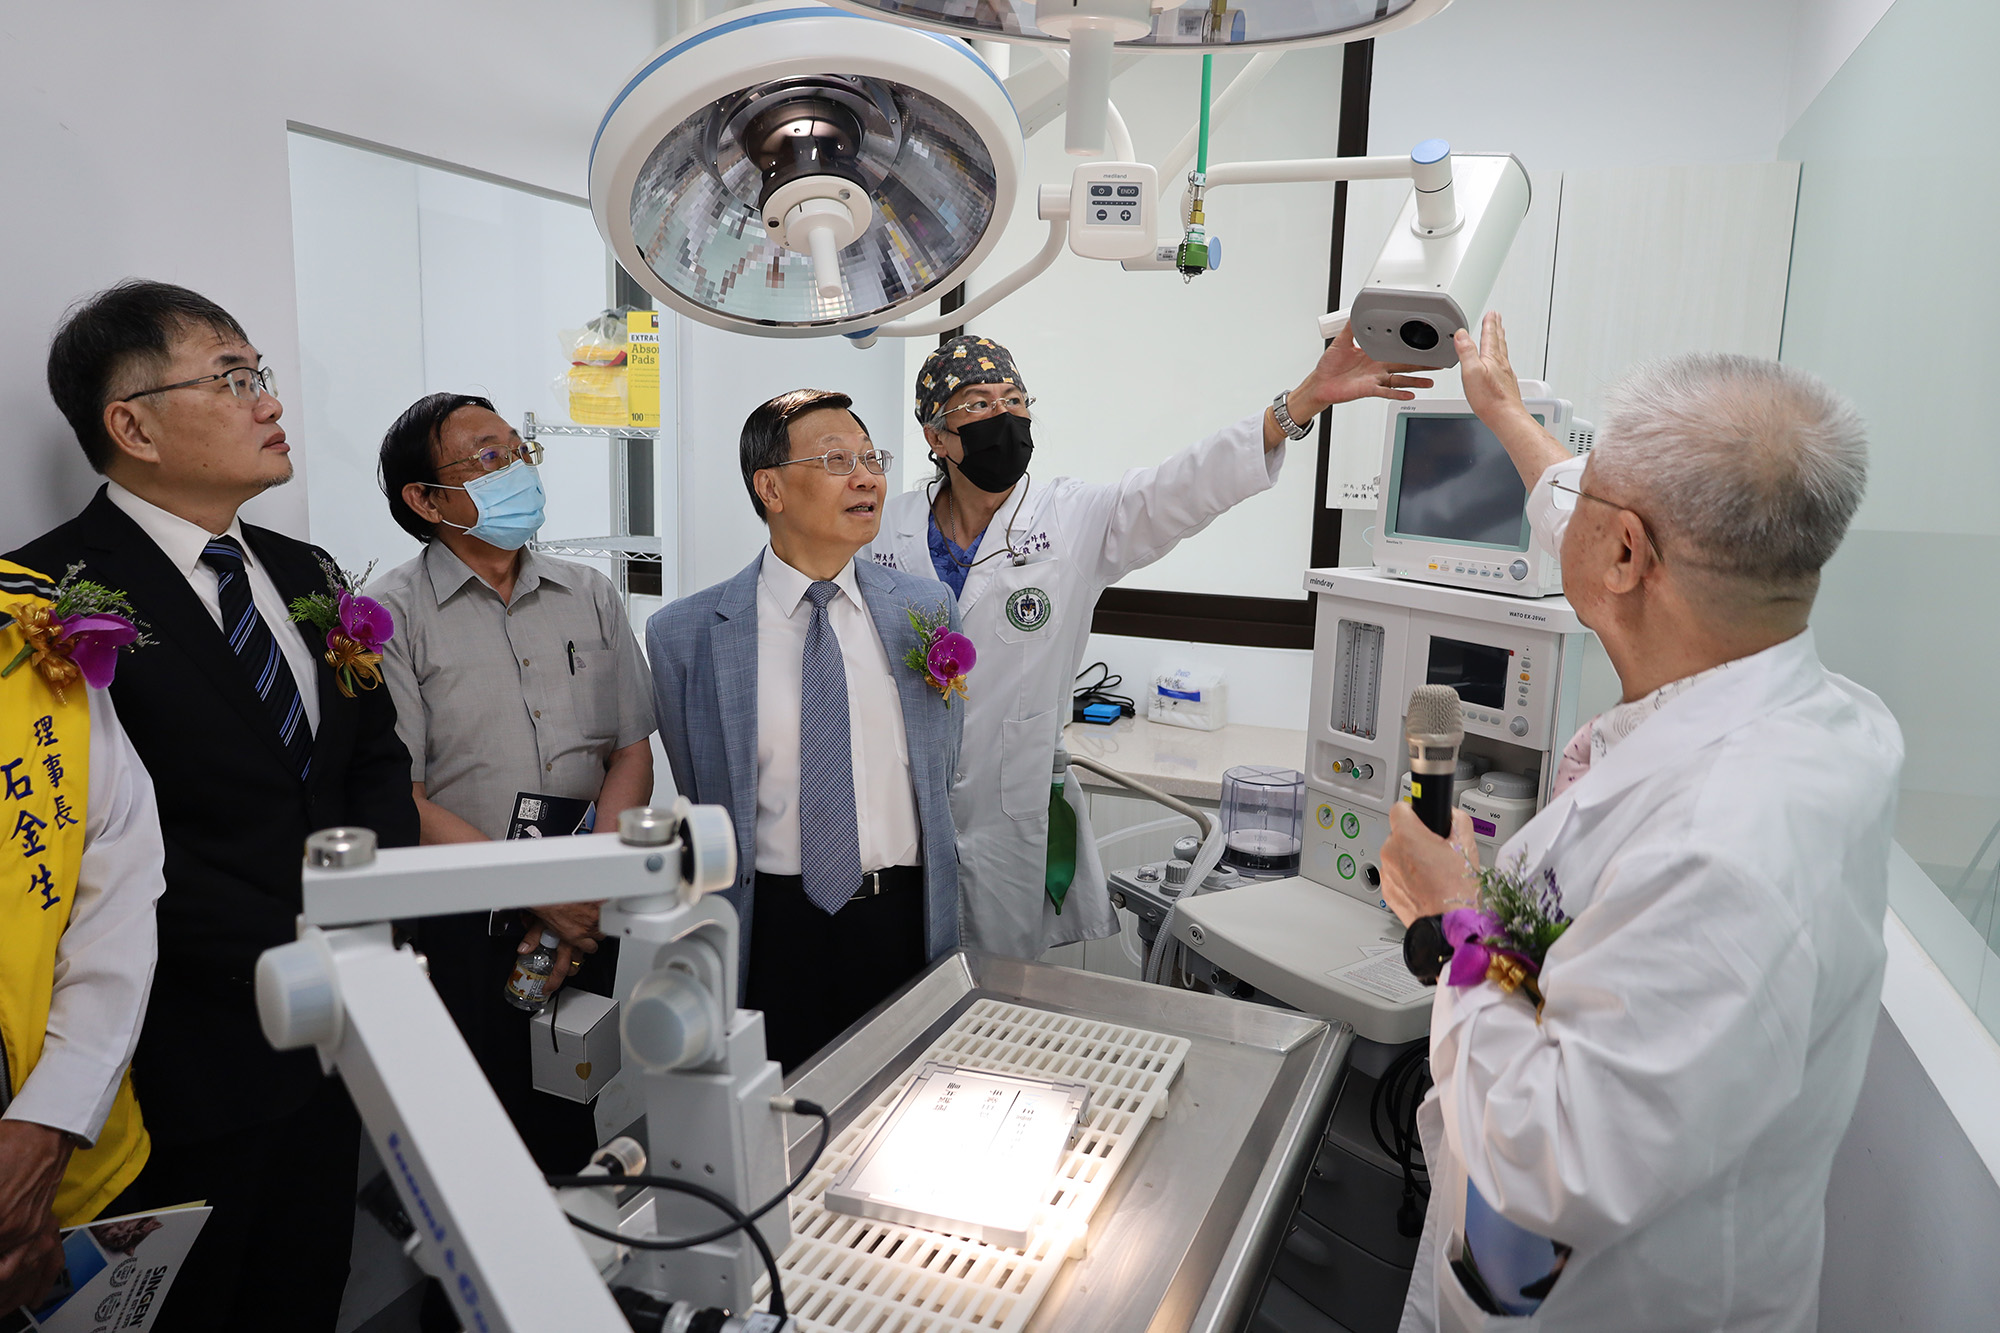 Asia University Veterinary Teaching Hospital provides students with internship opportunities. In the picture, Asia University President Jeffrey J.P. Tsai (third from the right) and others are visiting the highly advanced surgical room facilities at the Asia University Veterinary Teaching Hospital